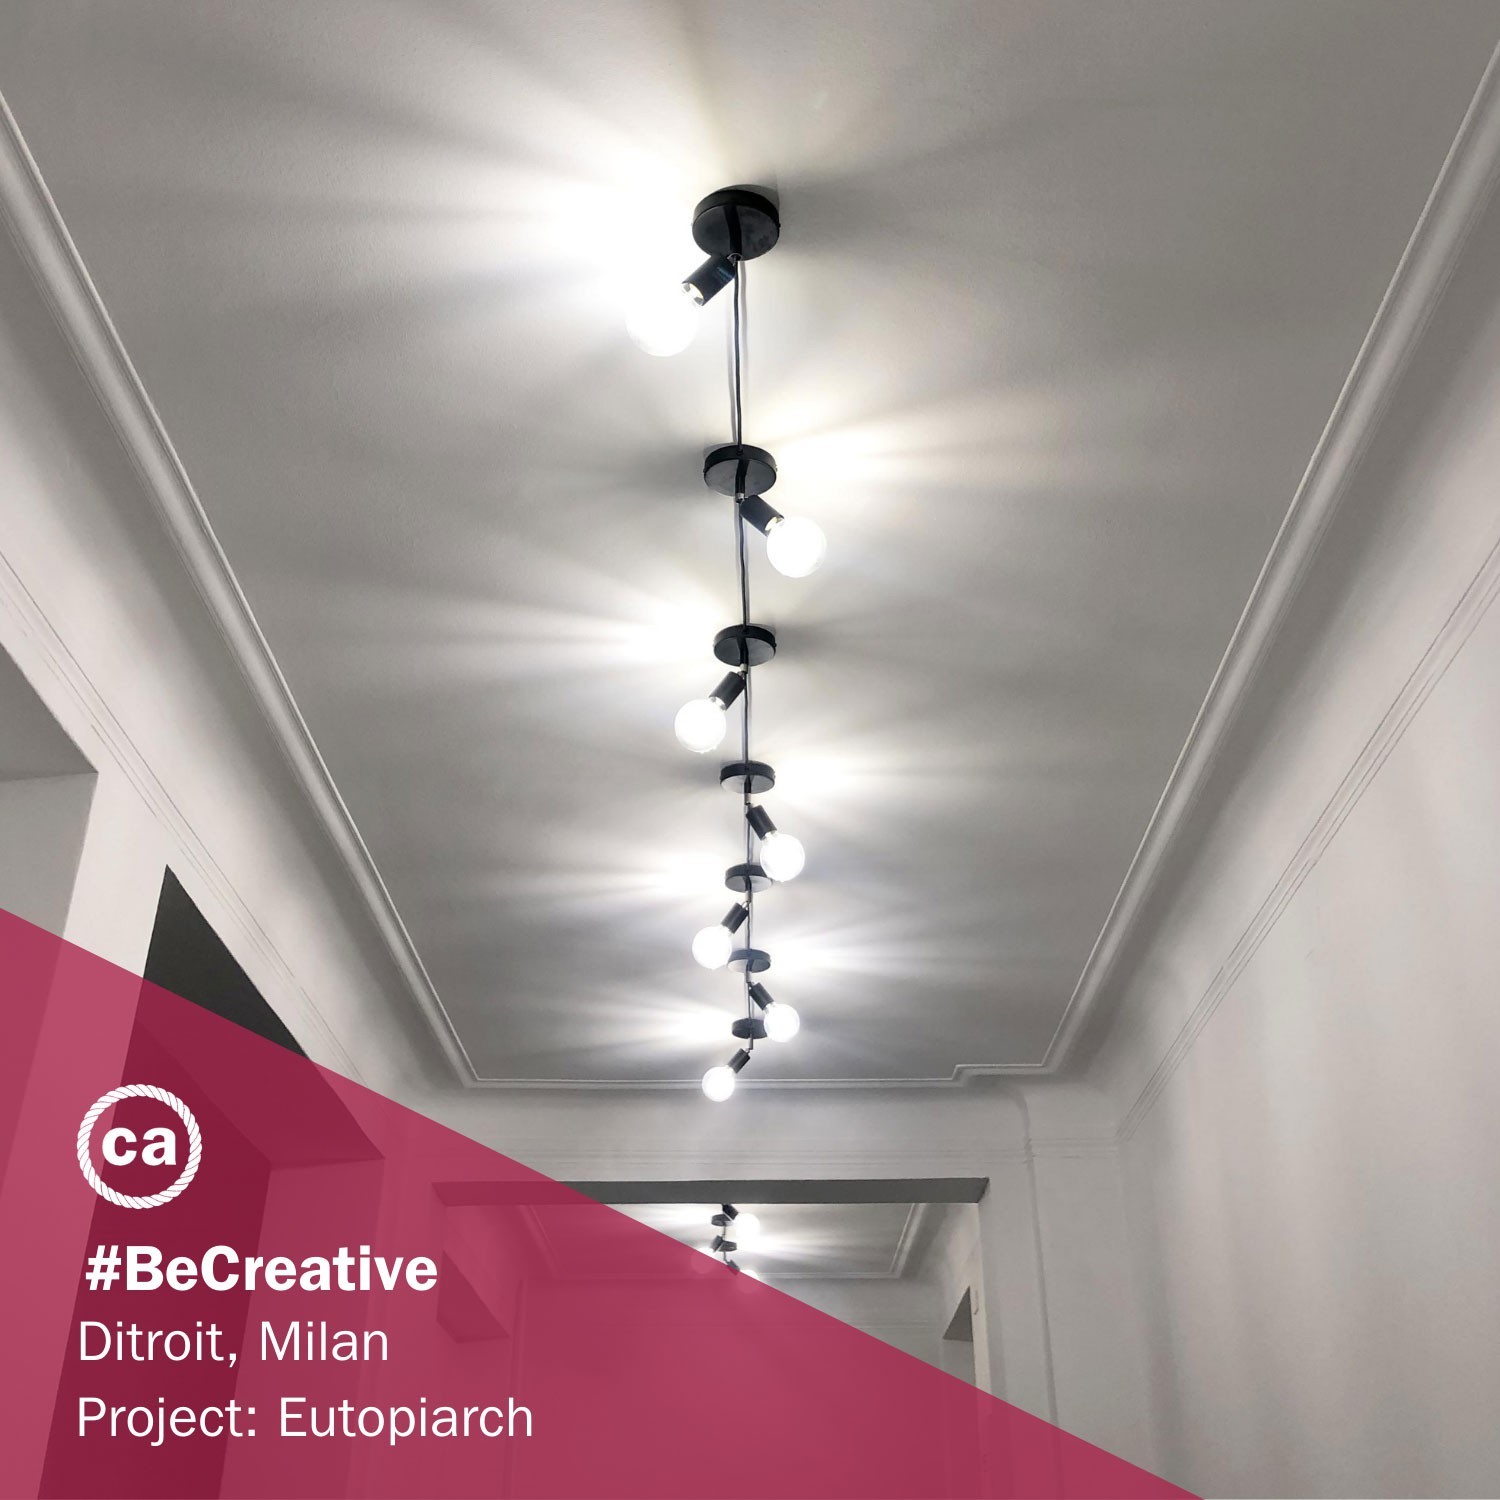 Spostaluce Metal 90°, the adjustable light source with fabric cable and side holes